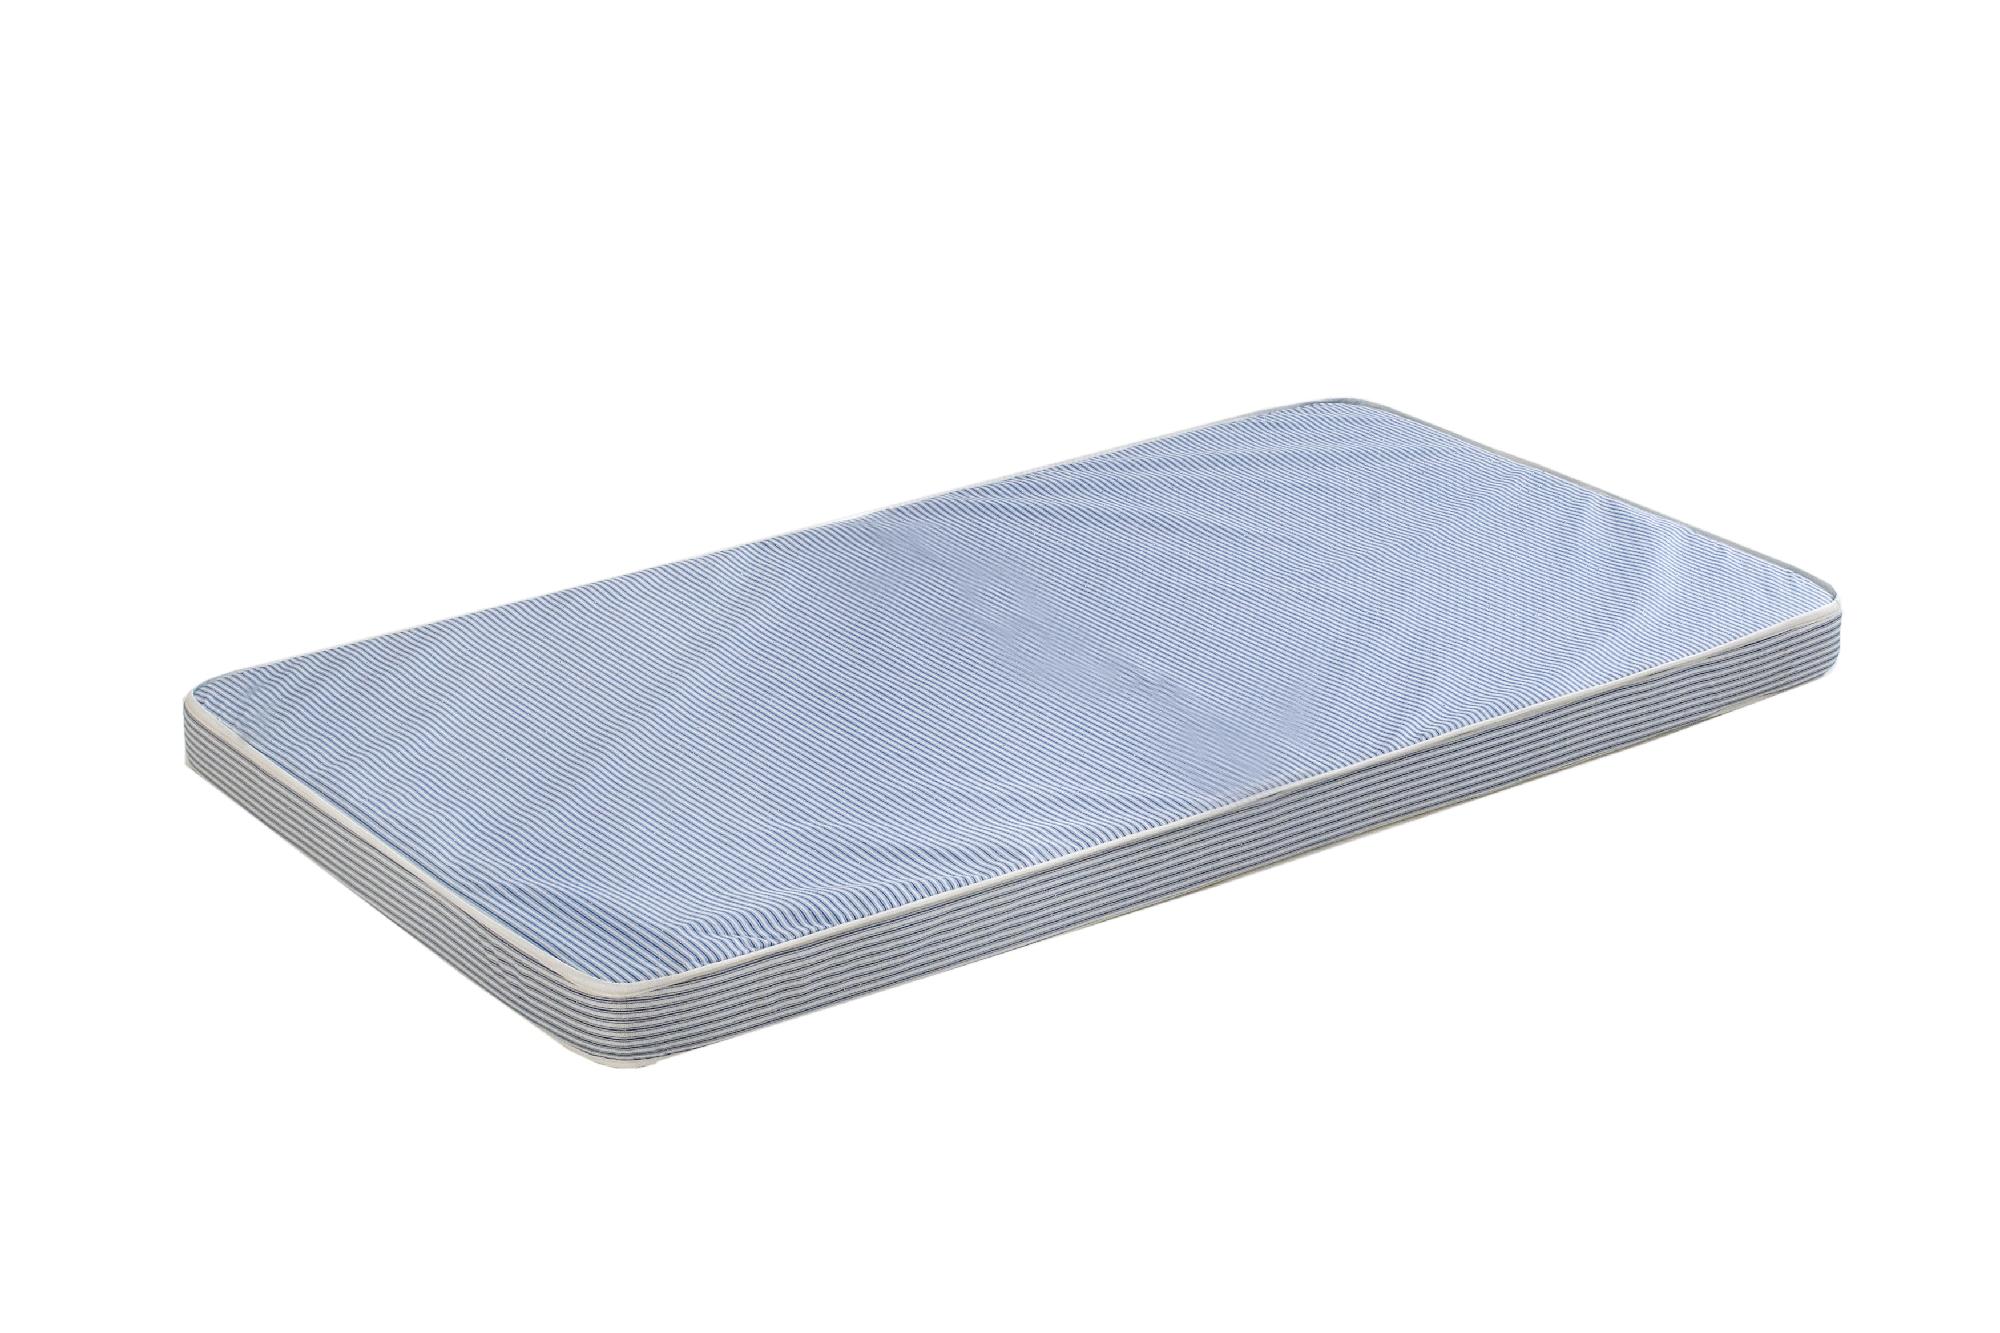 UPC 811810001442 product image for Innerspace Luxury Products 4-inch Truck Sleep Reversible Mattress Only | upcitemdb.com